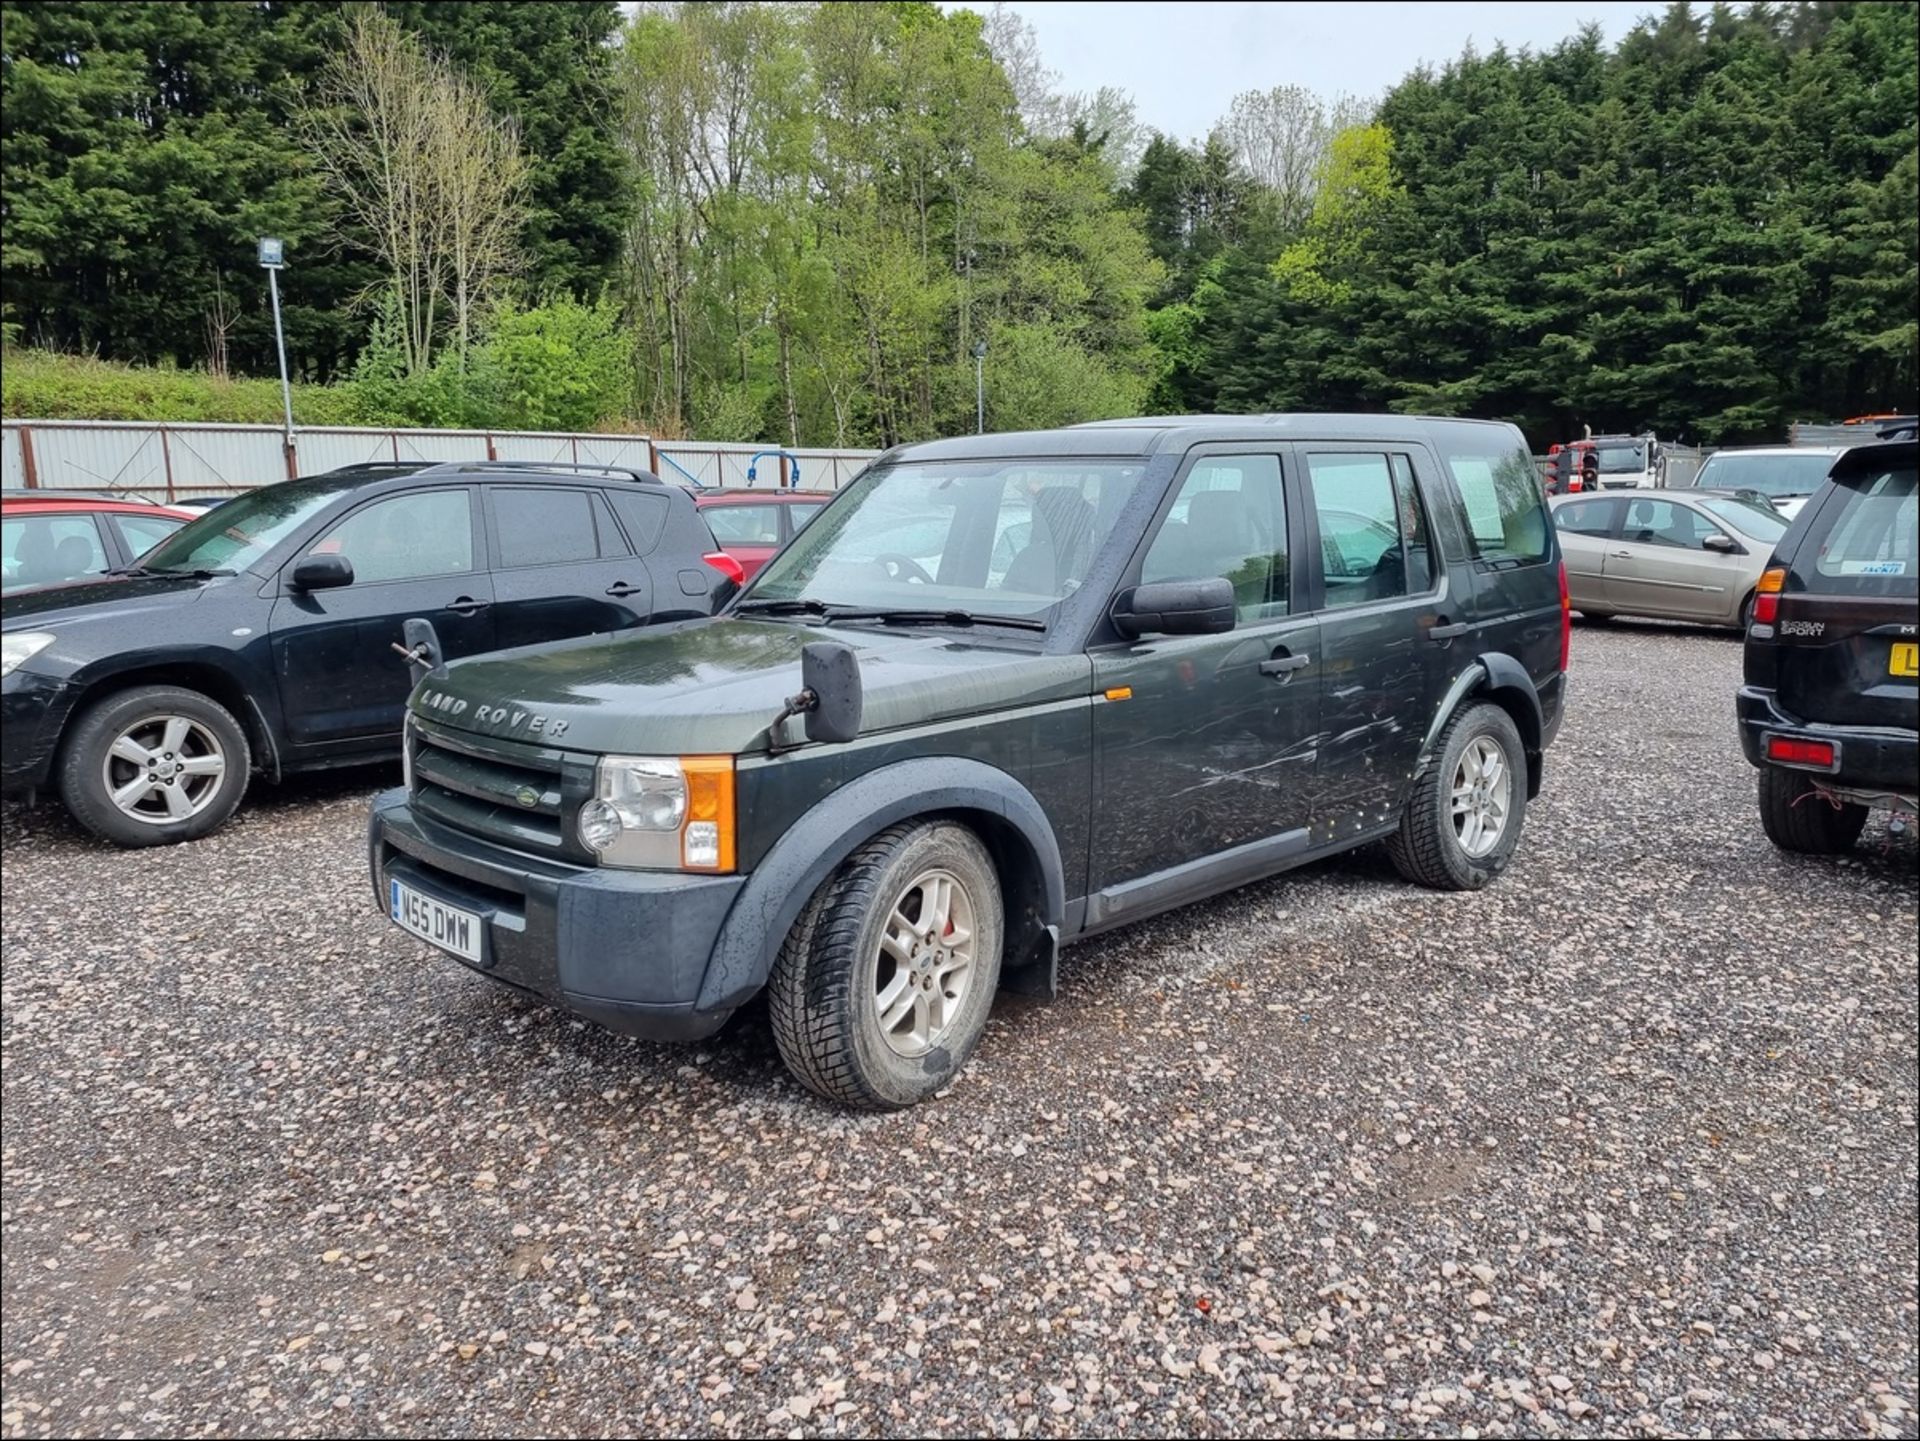 2004 LAND ROVER DISCOVERY 3 TDV6 - 2720cc 5dr Estate (Green) - Image 3 of 13